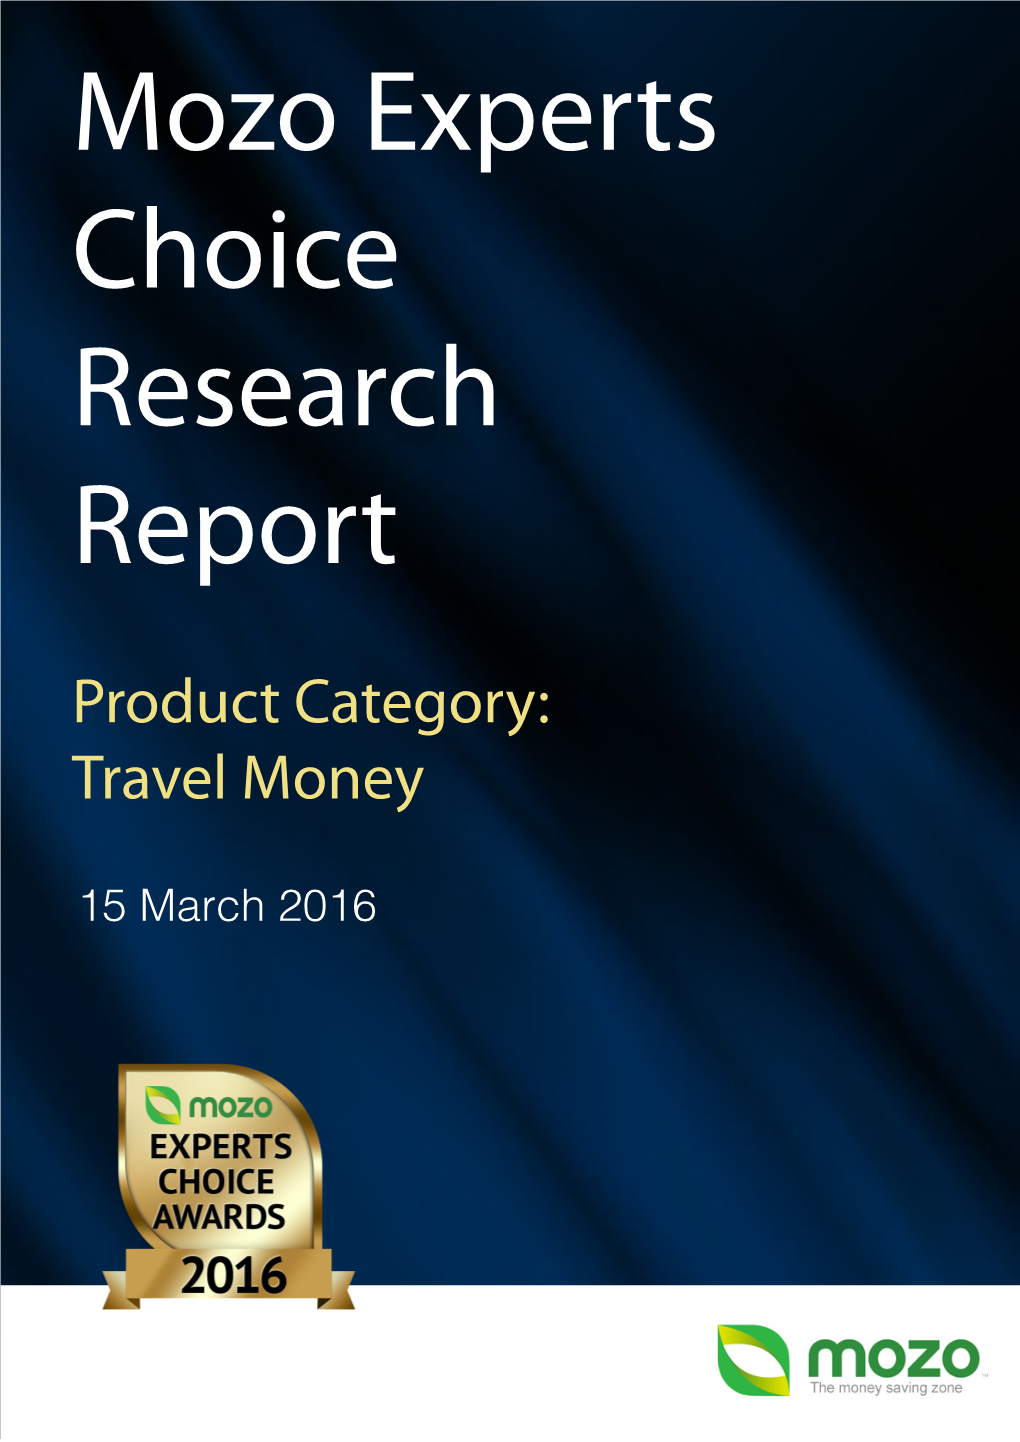 Mozo Experts Choice Research Report